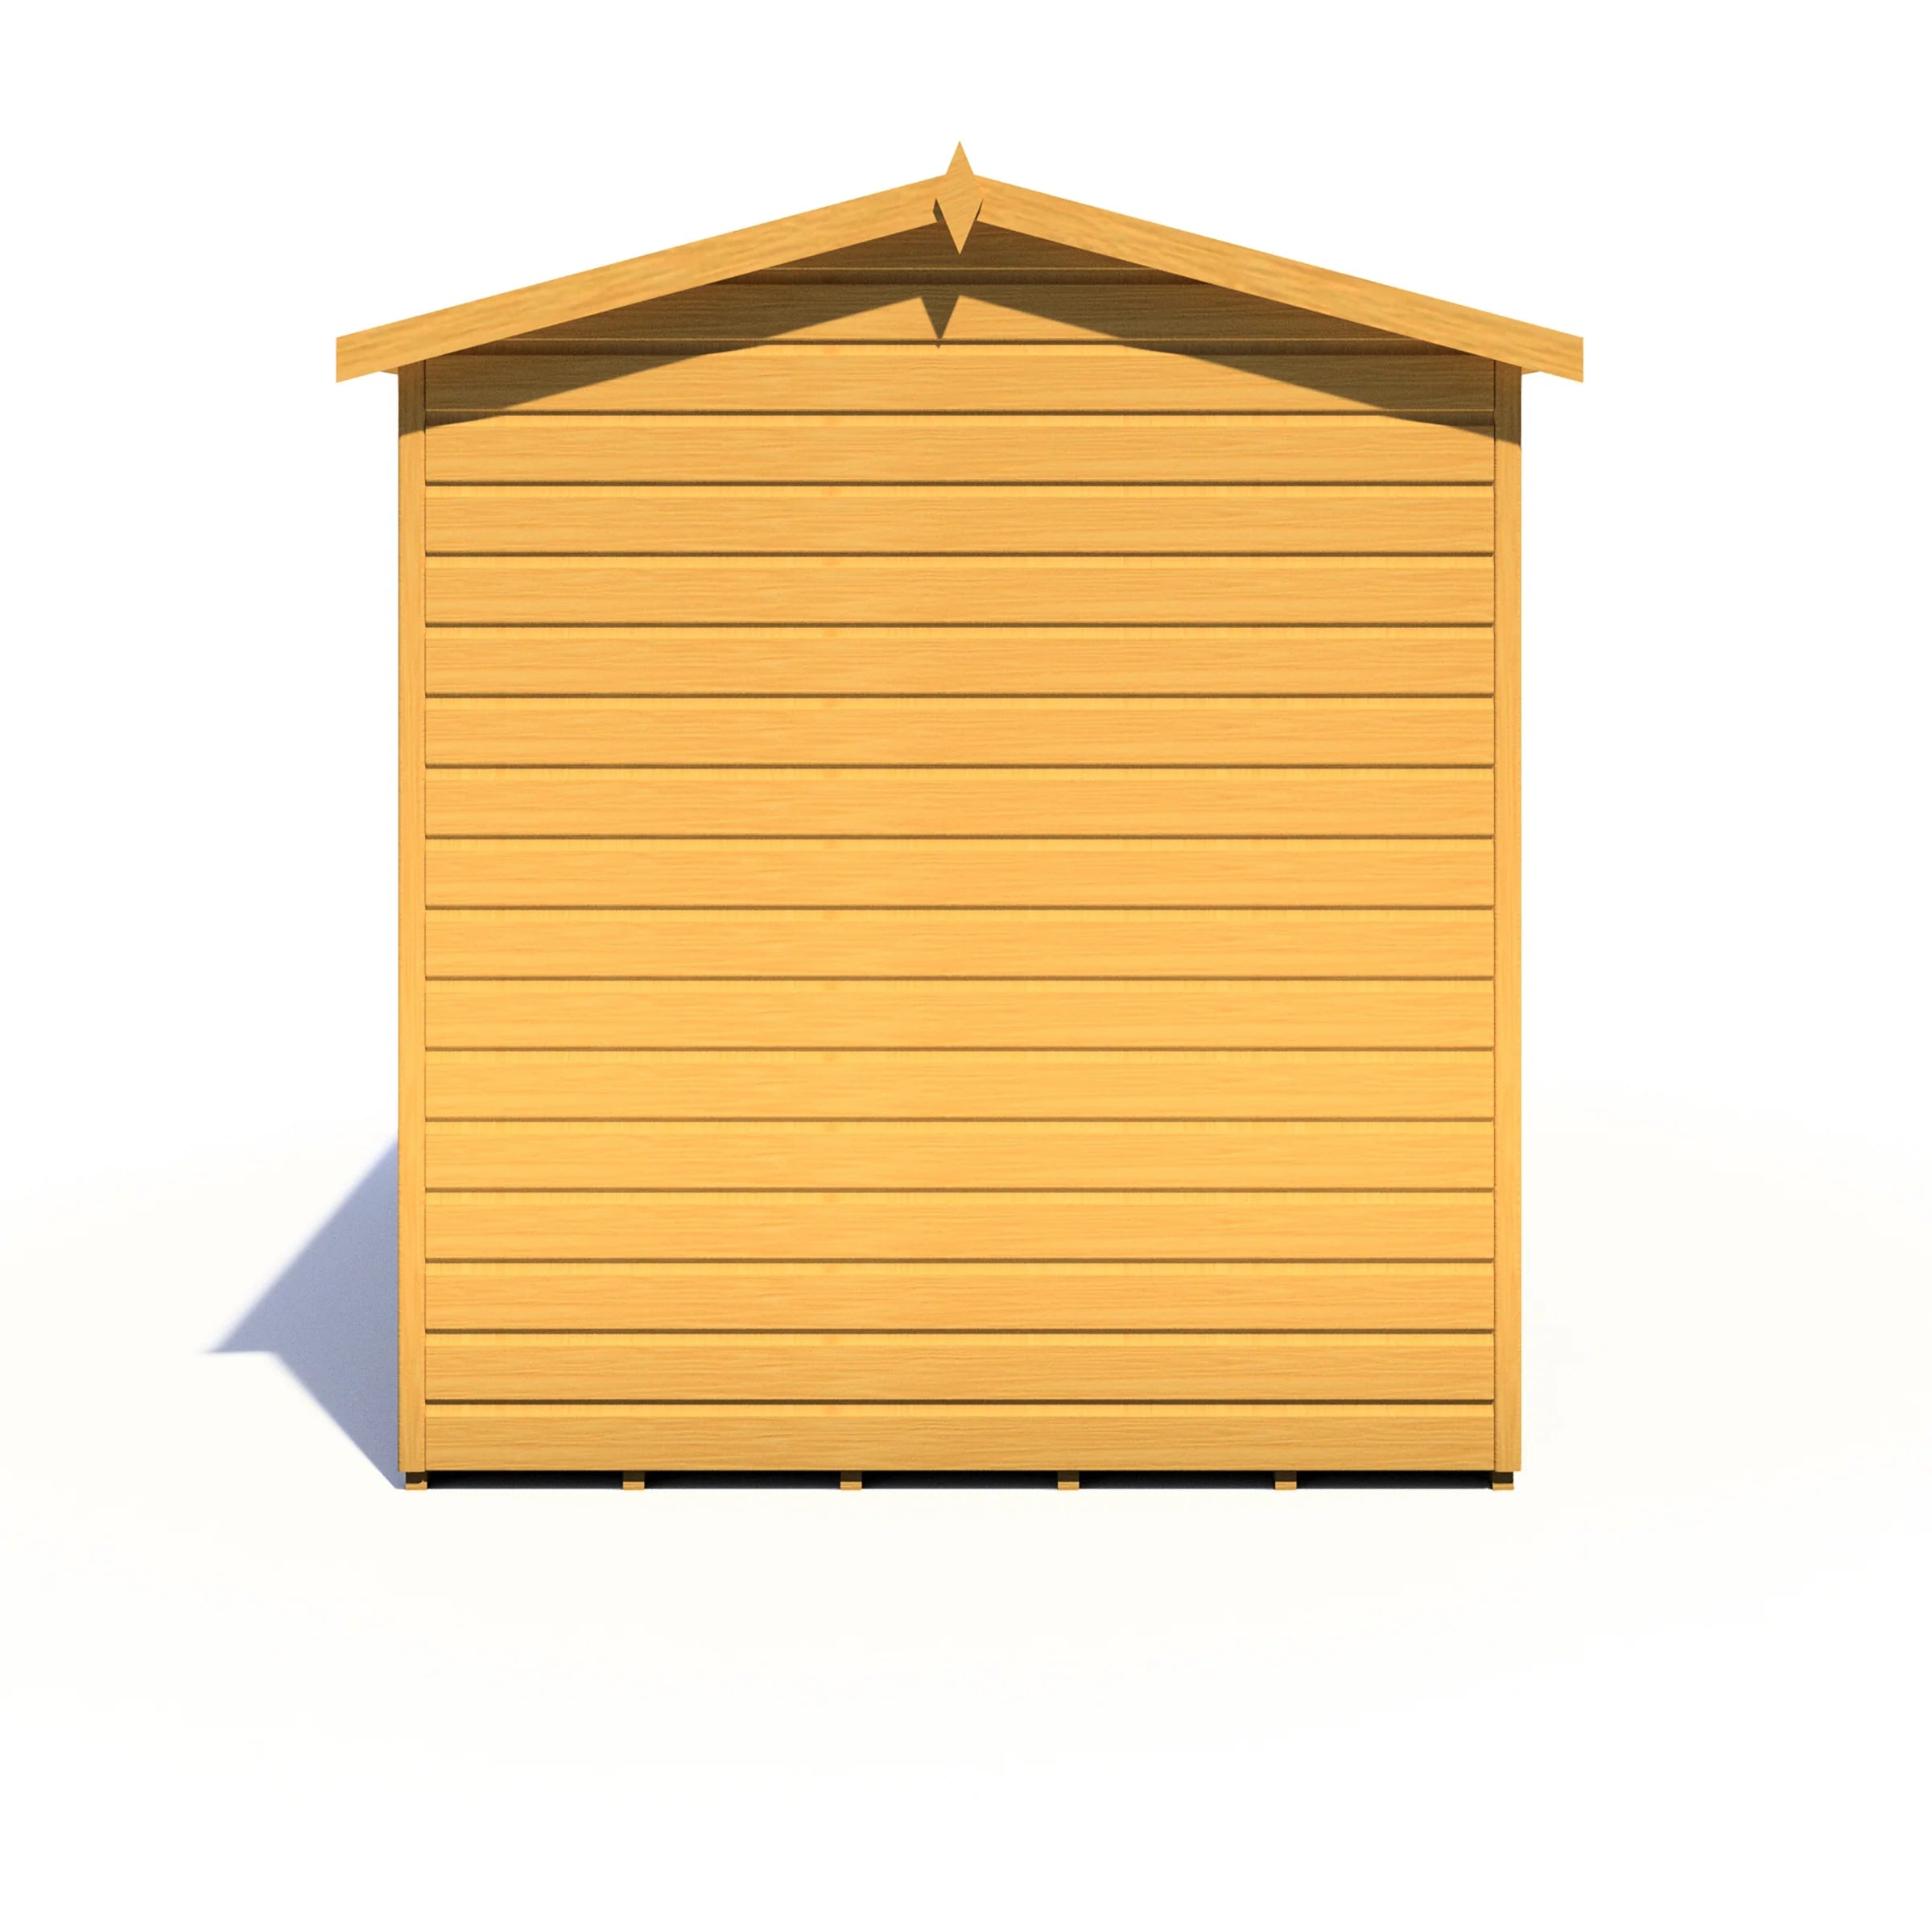 Shire Lewis Reverse Apex Style D Single Door Garden Shed 10x6